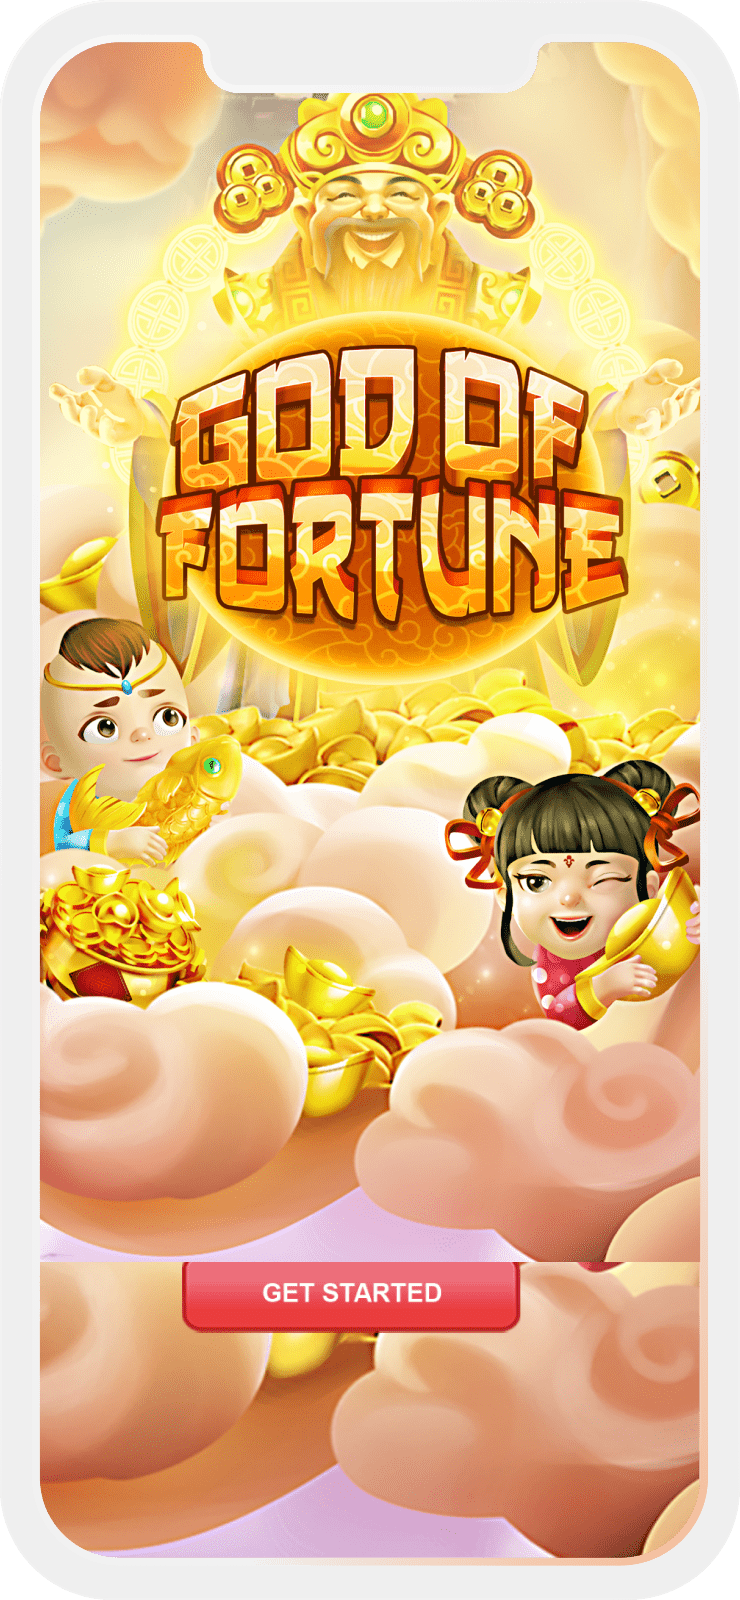 God of Fortune's phone banner